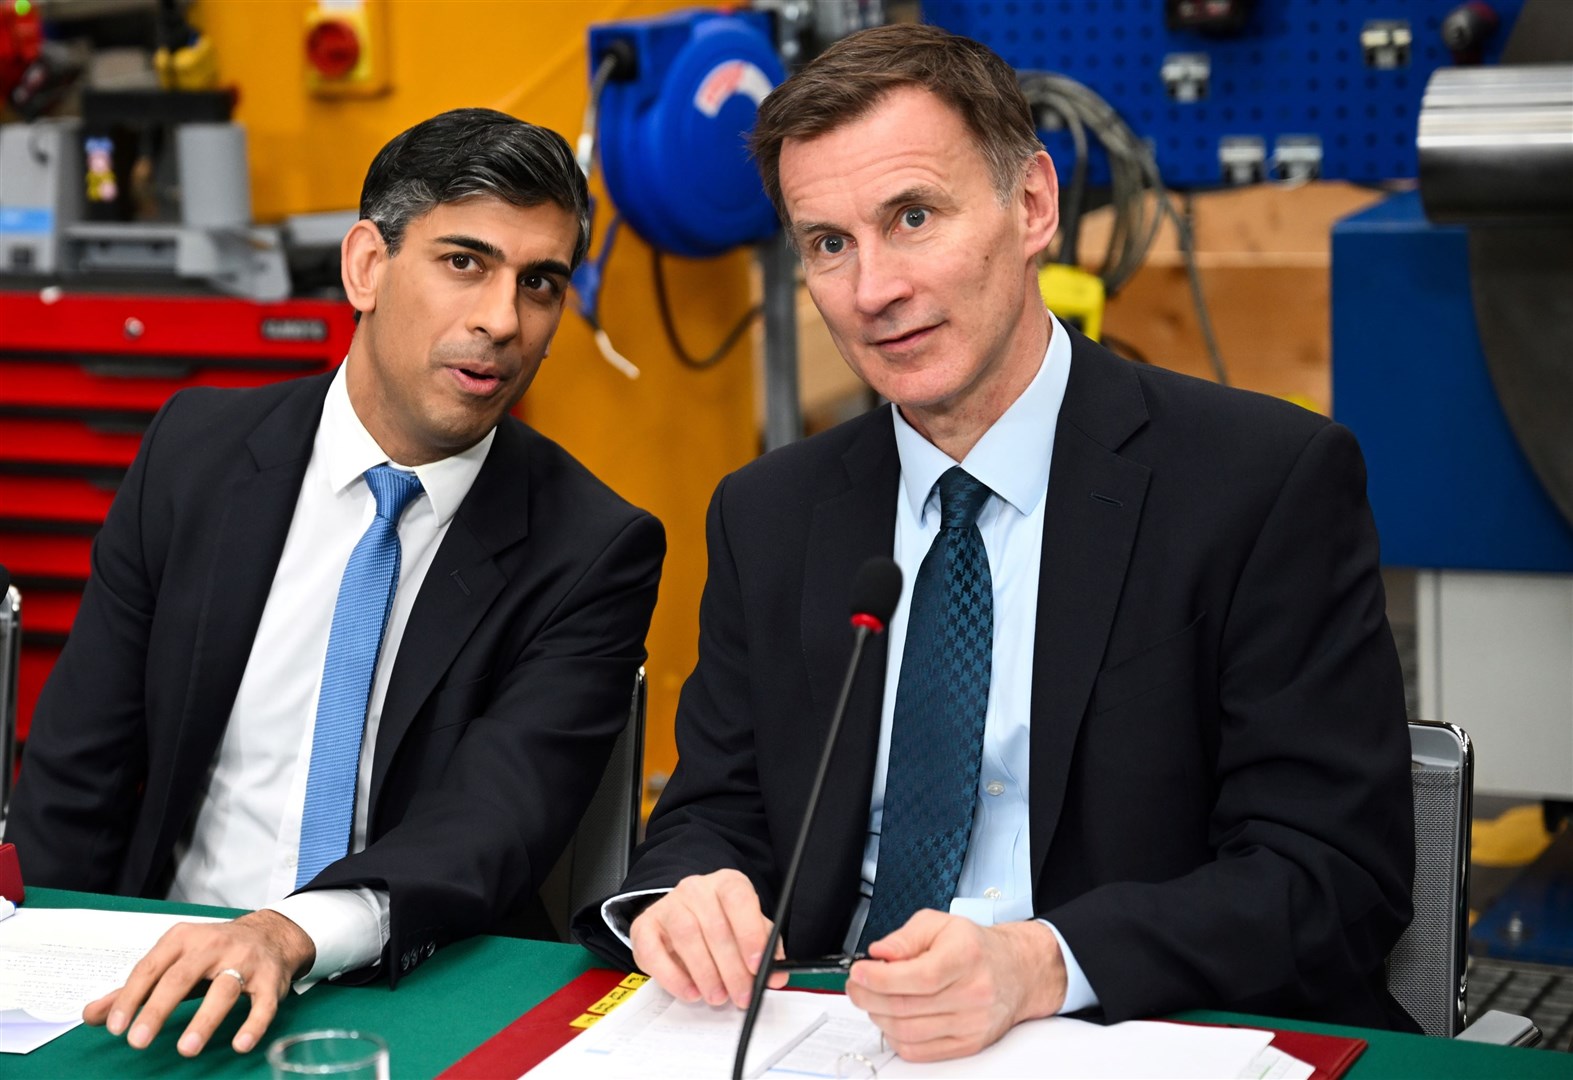 It is understood Rishi Sunak and Jeremy Hunt will meet on Sunday evening to make a final decision on tax cuts (Paul Ellis/PA)